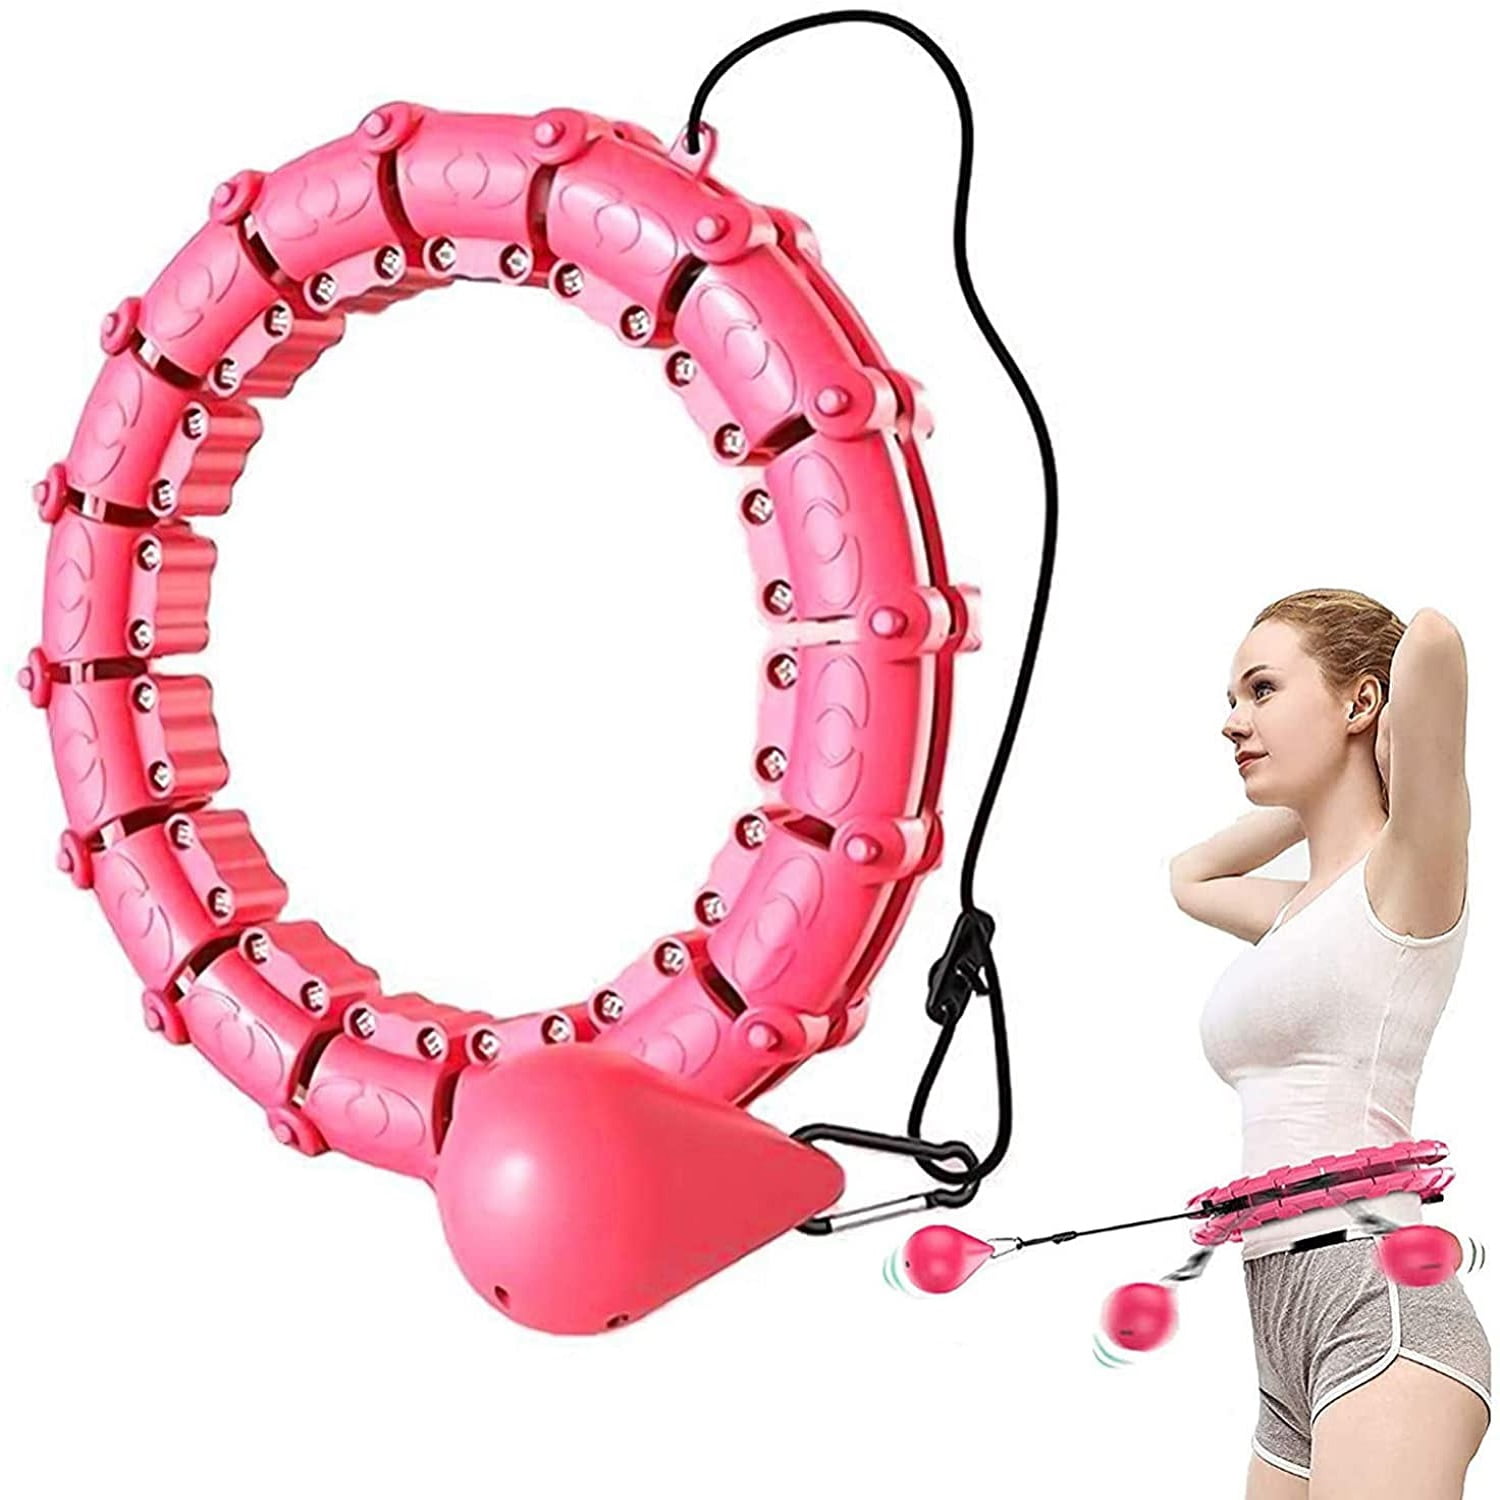 AUHO Hoola Smart Hoop Weighted Fitness Hoop for Adults with Counter Smart Exercise Hoop for Women Weight Loss 2 in 1 Adjustable Circular Massage with 24 Detachable Knots Fitness Equipment 